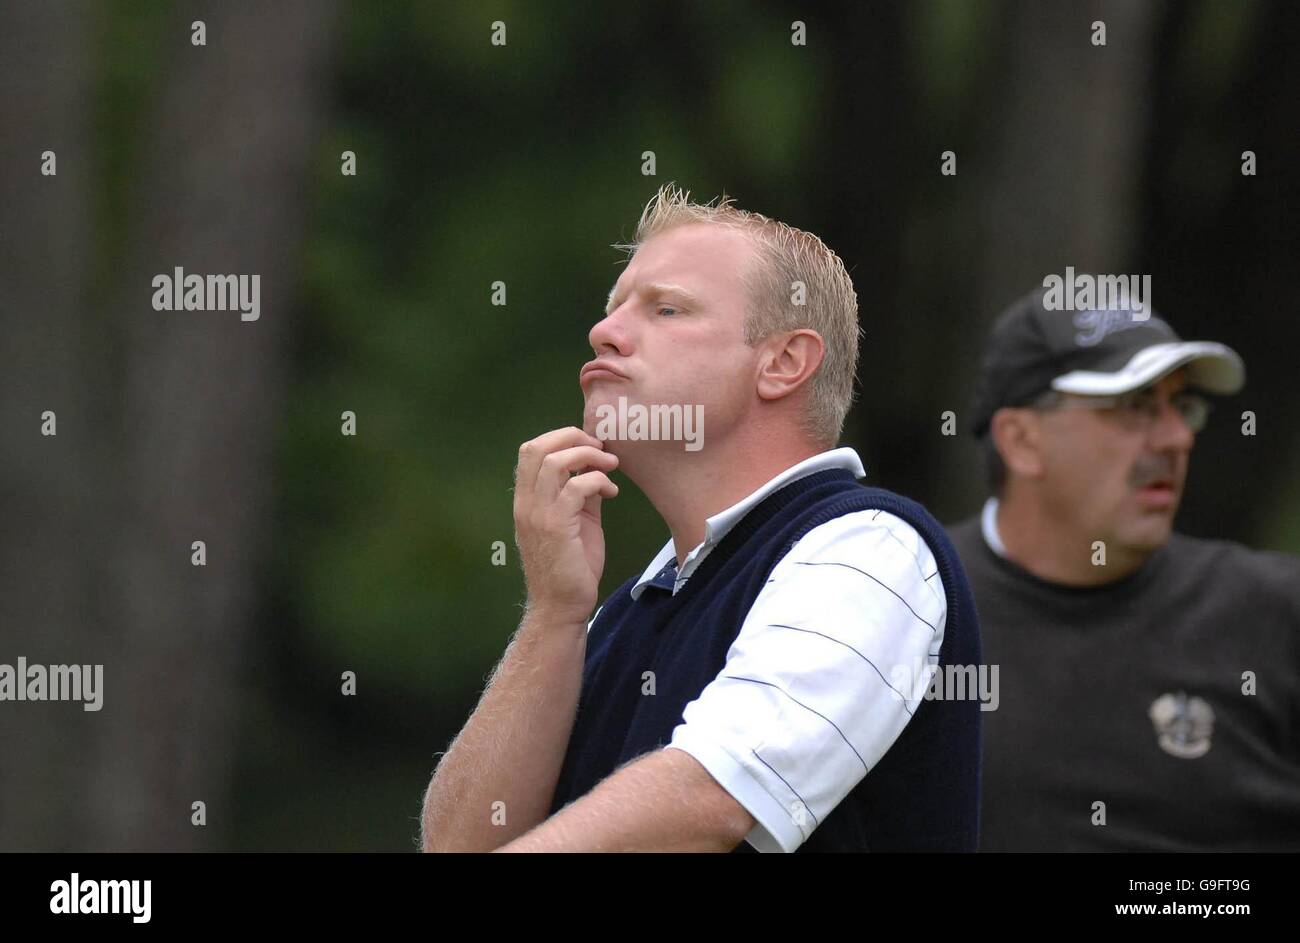 Stephen Gray at the first tee during the Gleneagles Scottish PGA Championship at Gleneagles. Stock Photo